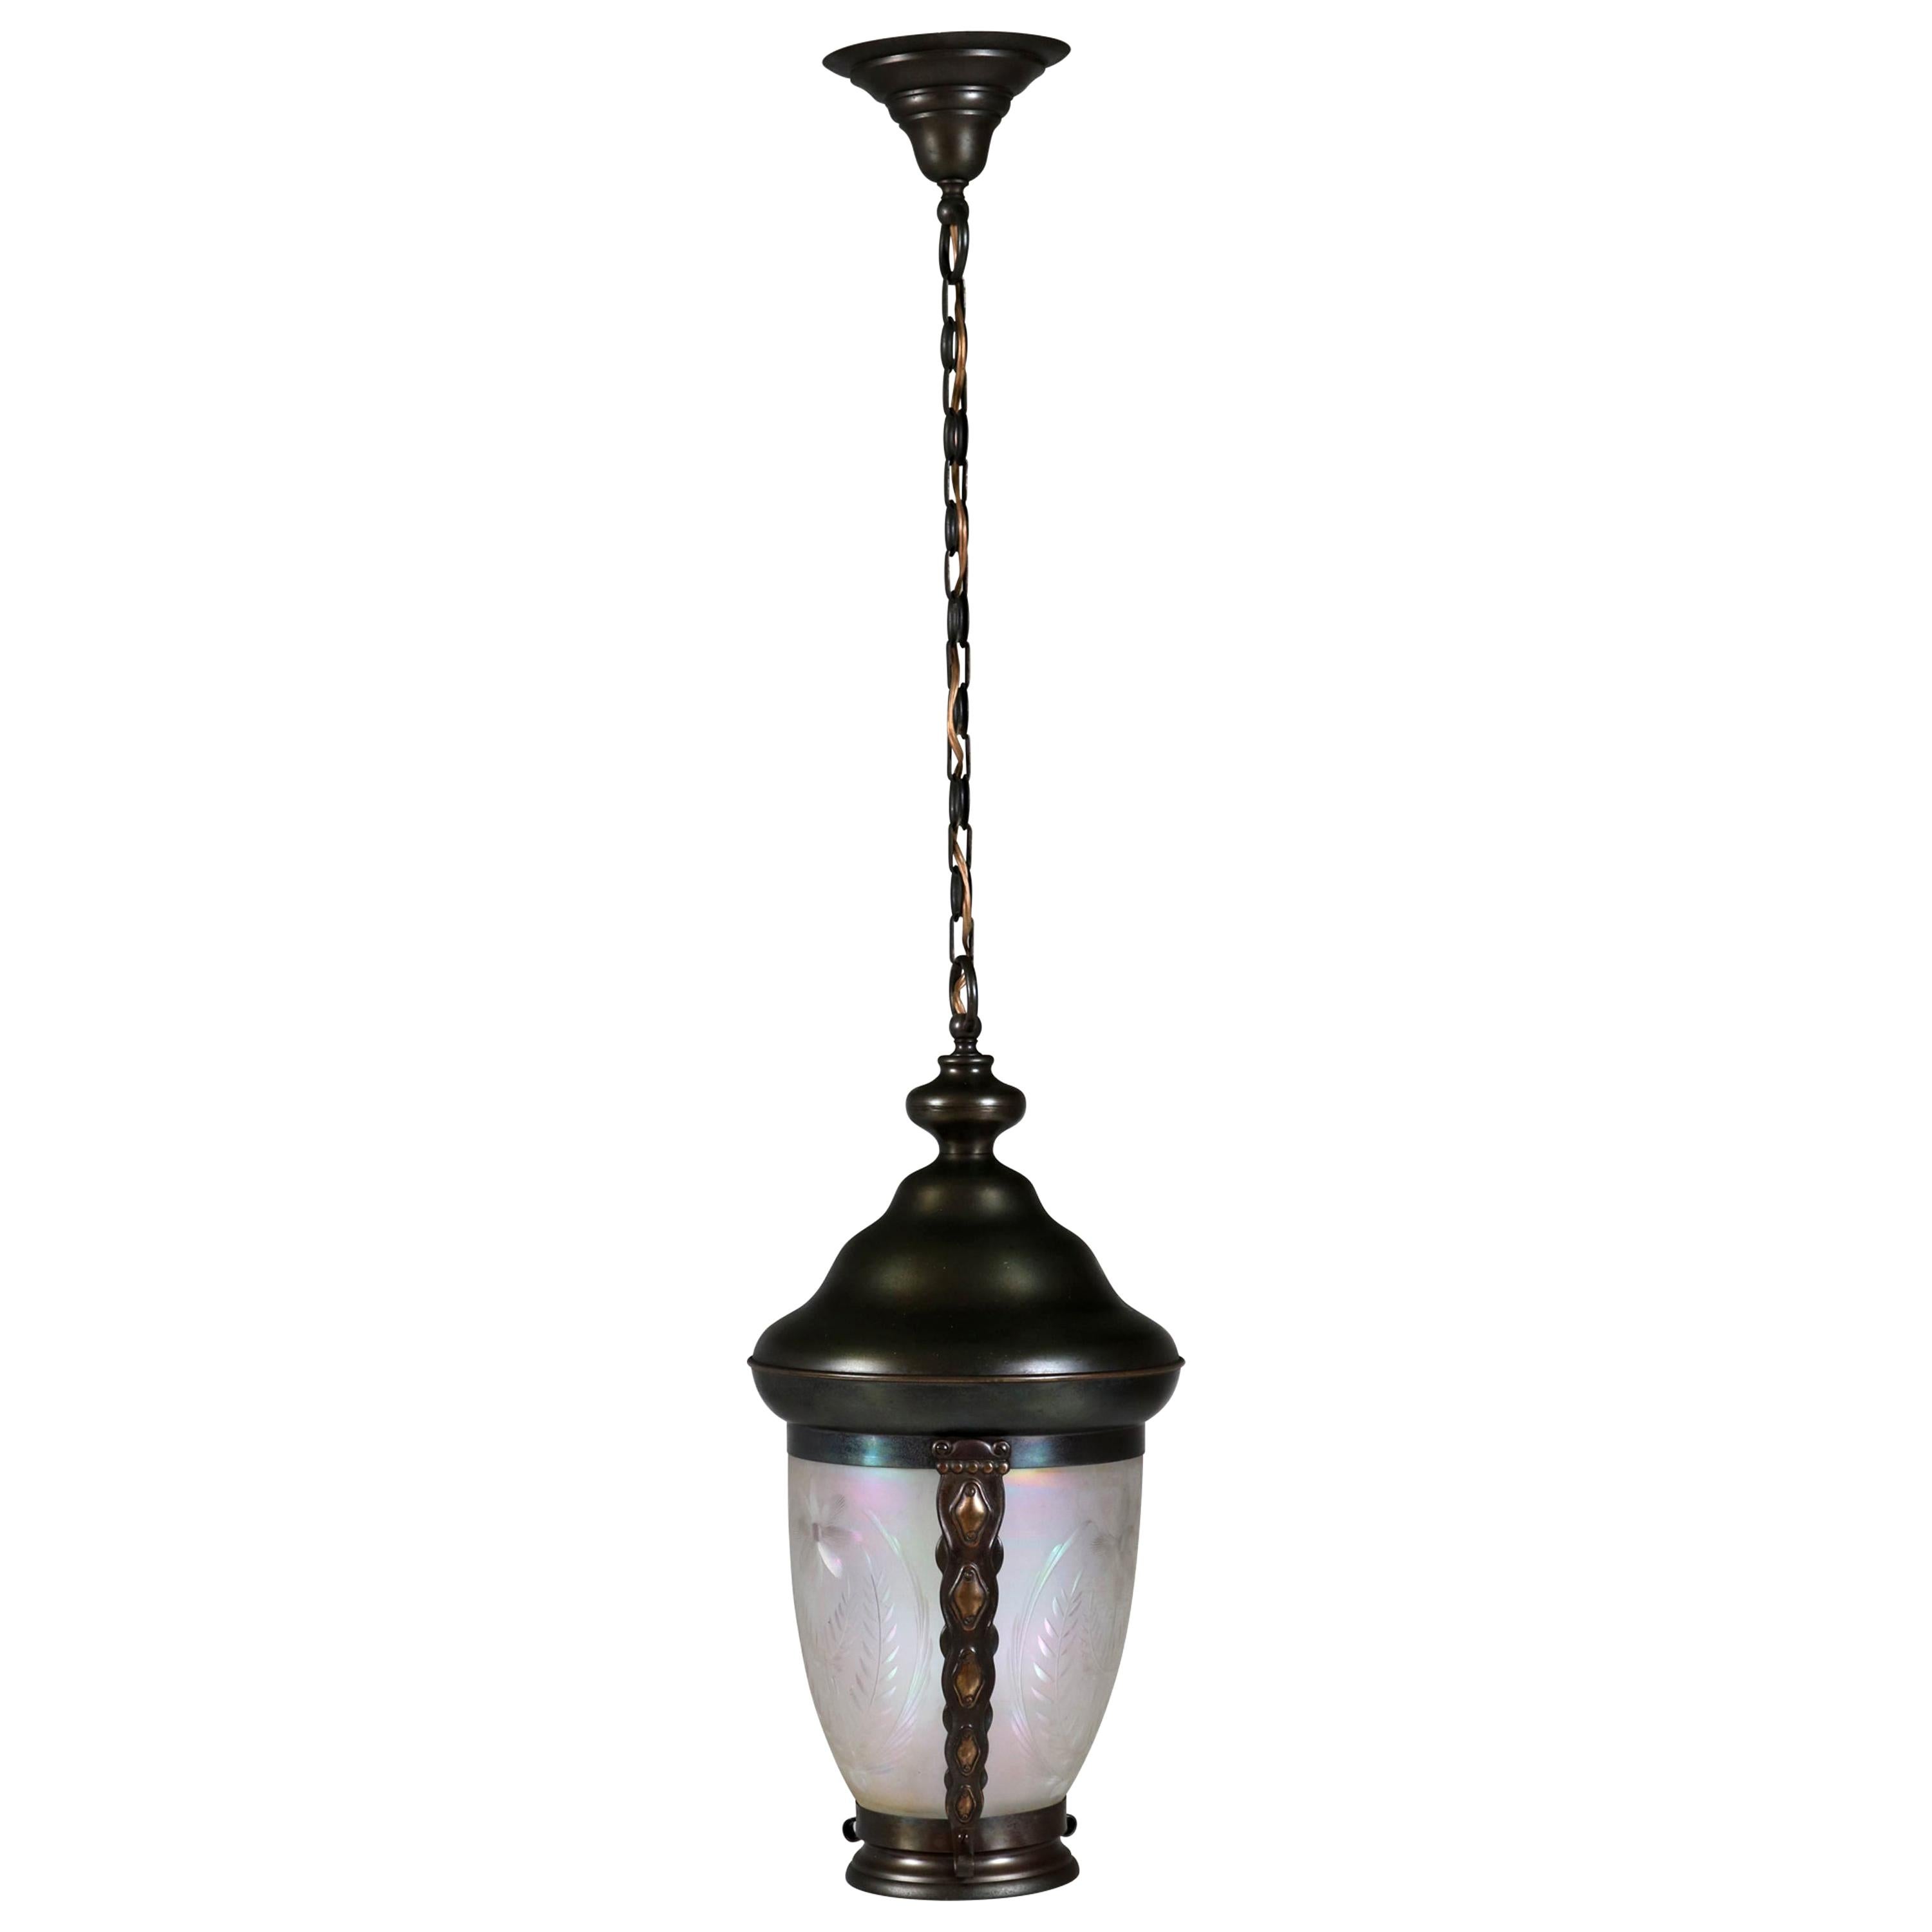 Brass Art Nouveau Lantern or Pendant Lamp with Petrol Glass Shade, 1900s For Sale